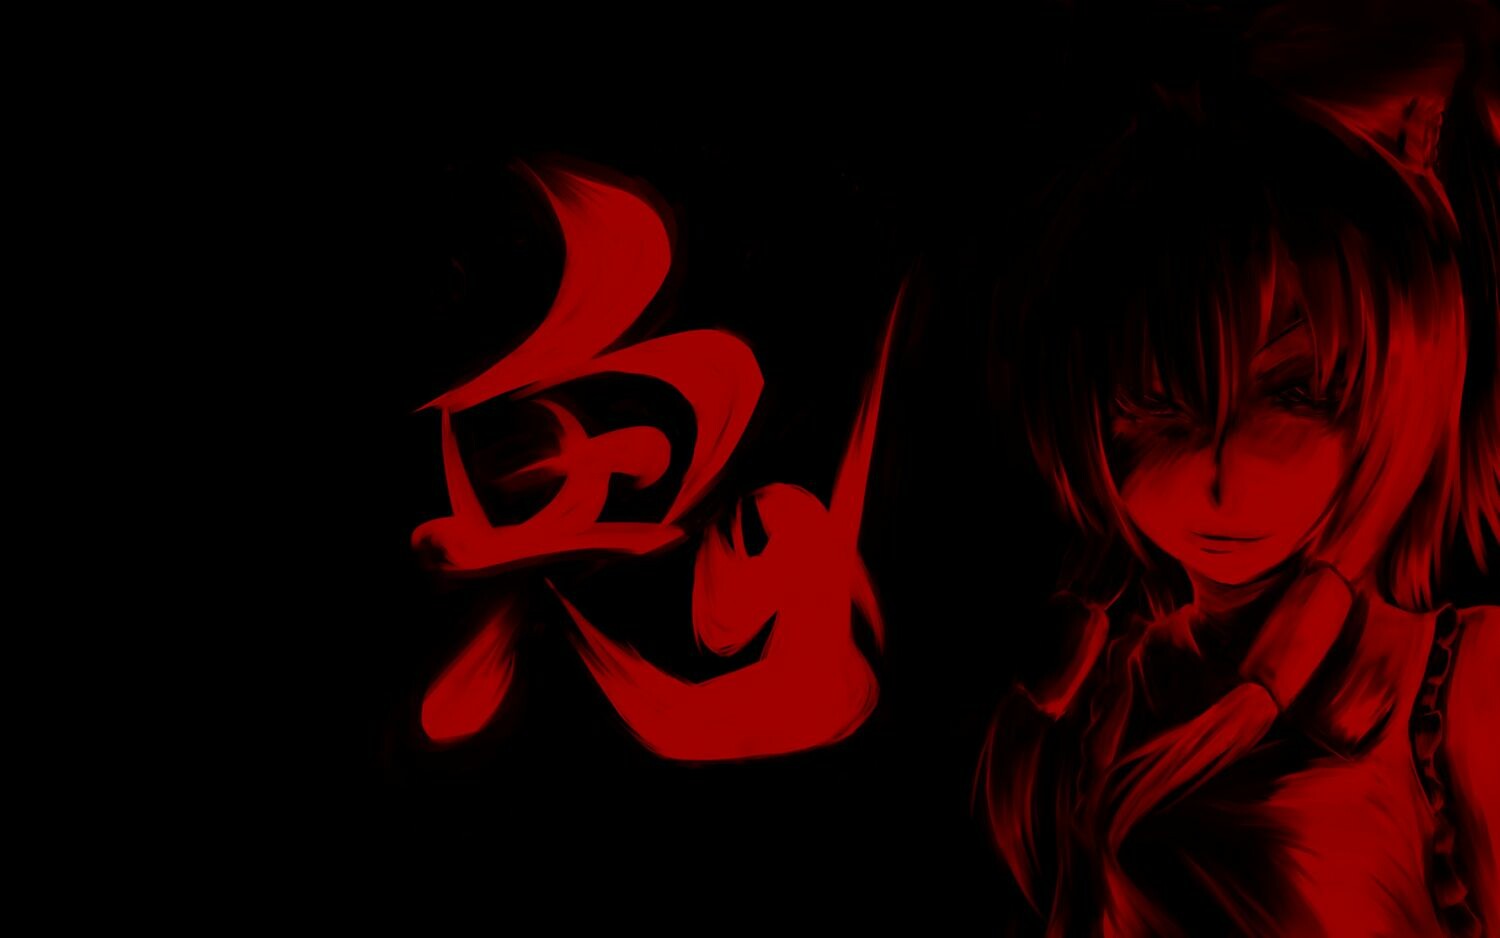 Dark Red Anime Wallpaper: HD, 4K, 5K for PC and Mobile. Download free image for iPhone, Android